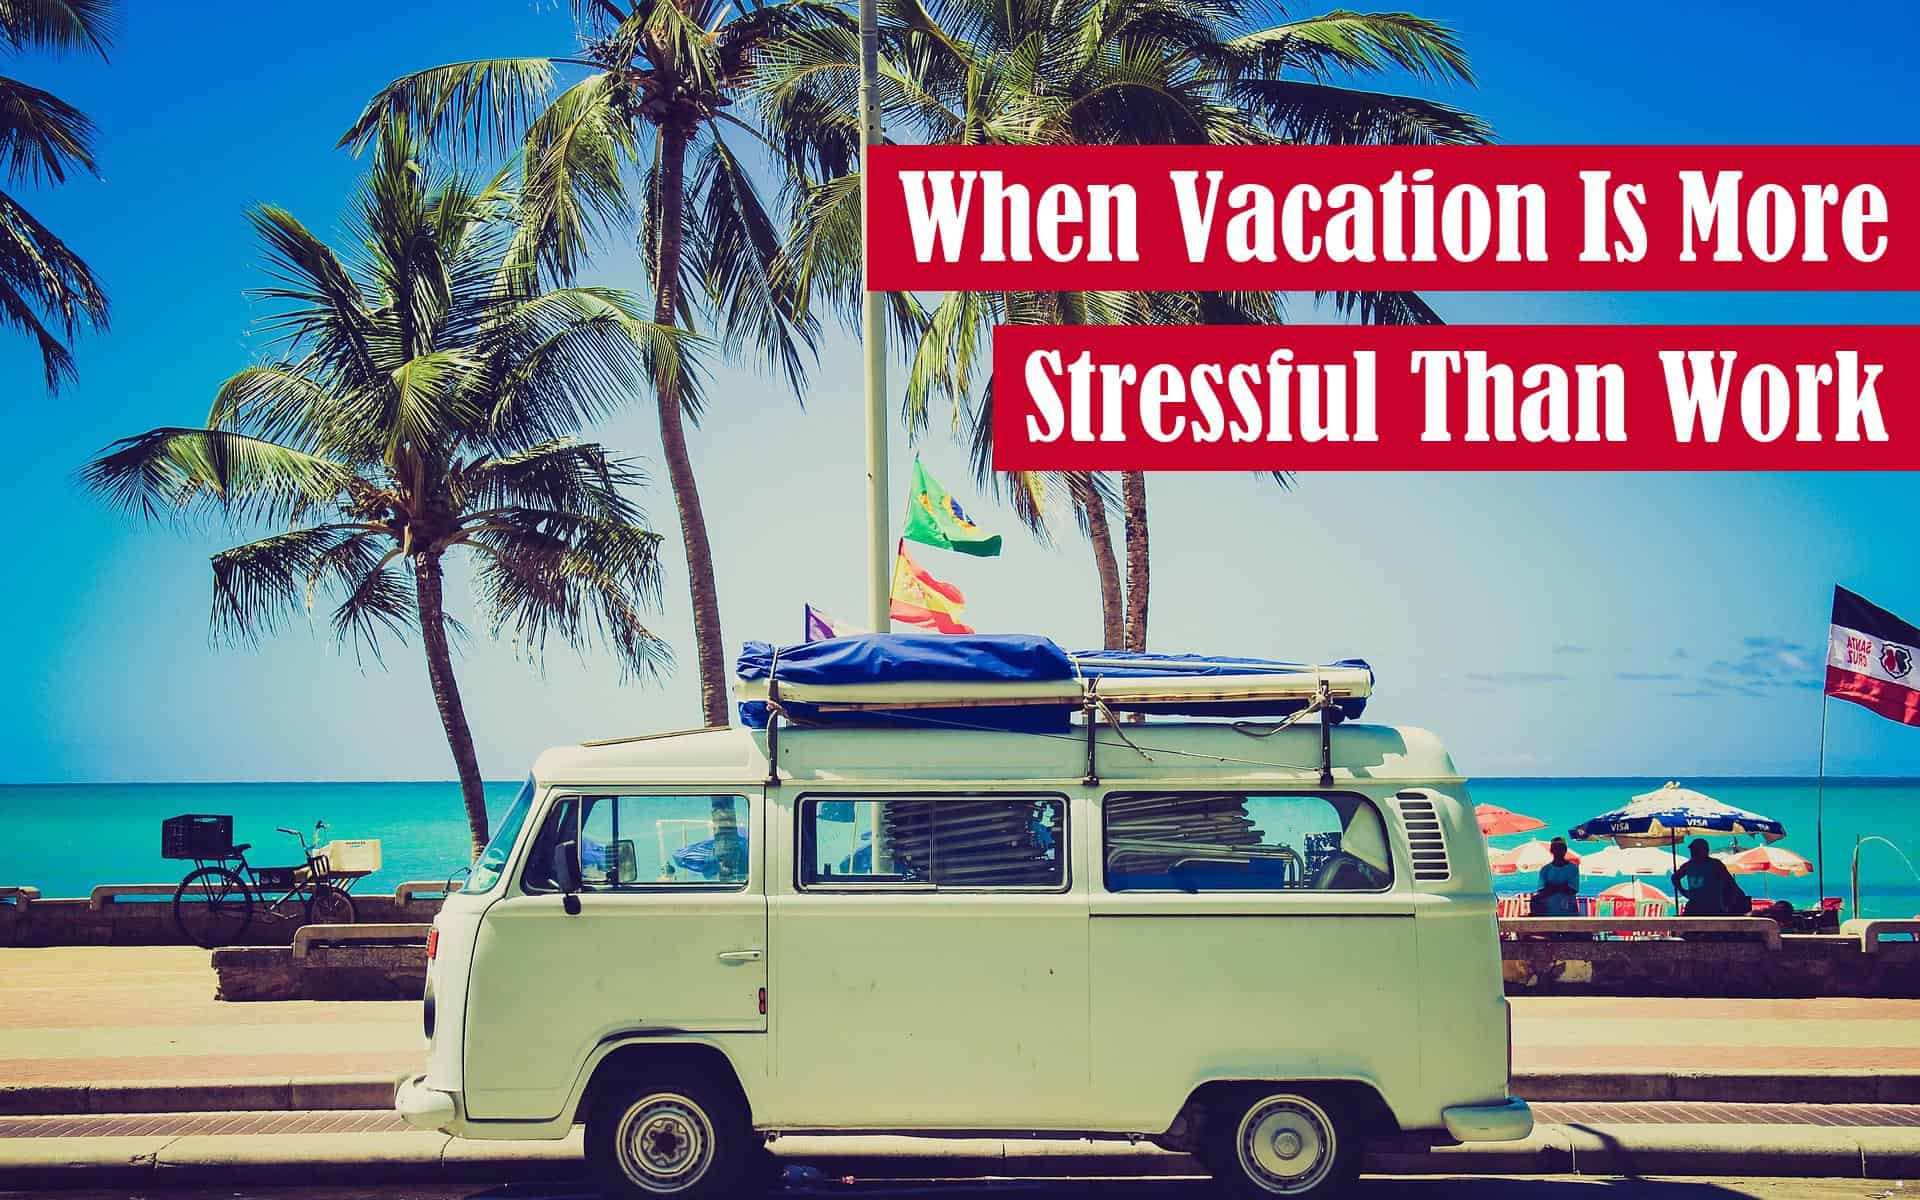 When Vacation is More Stressful than Work Featured Image